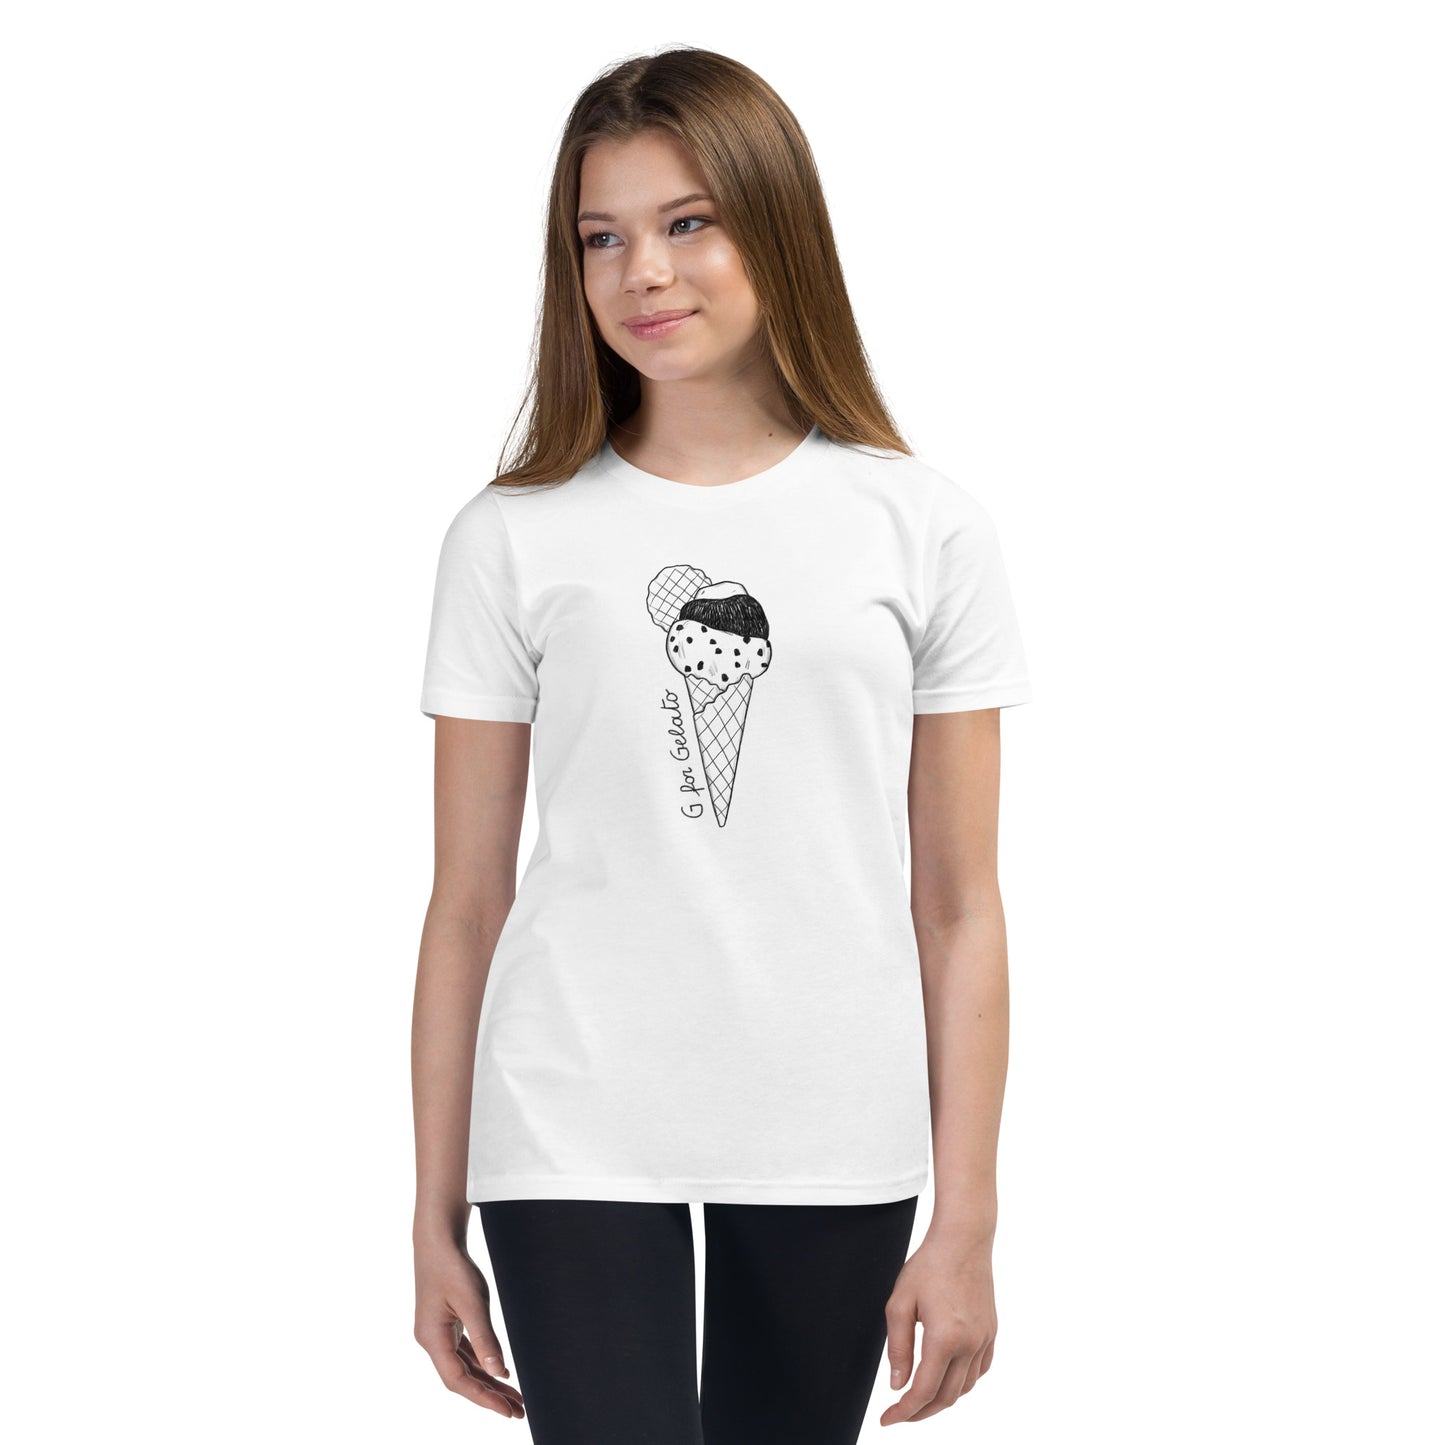 Gelato on a Youth Short Sleeve T-Shirt